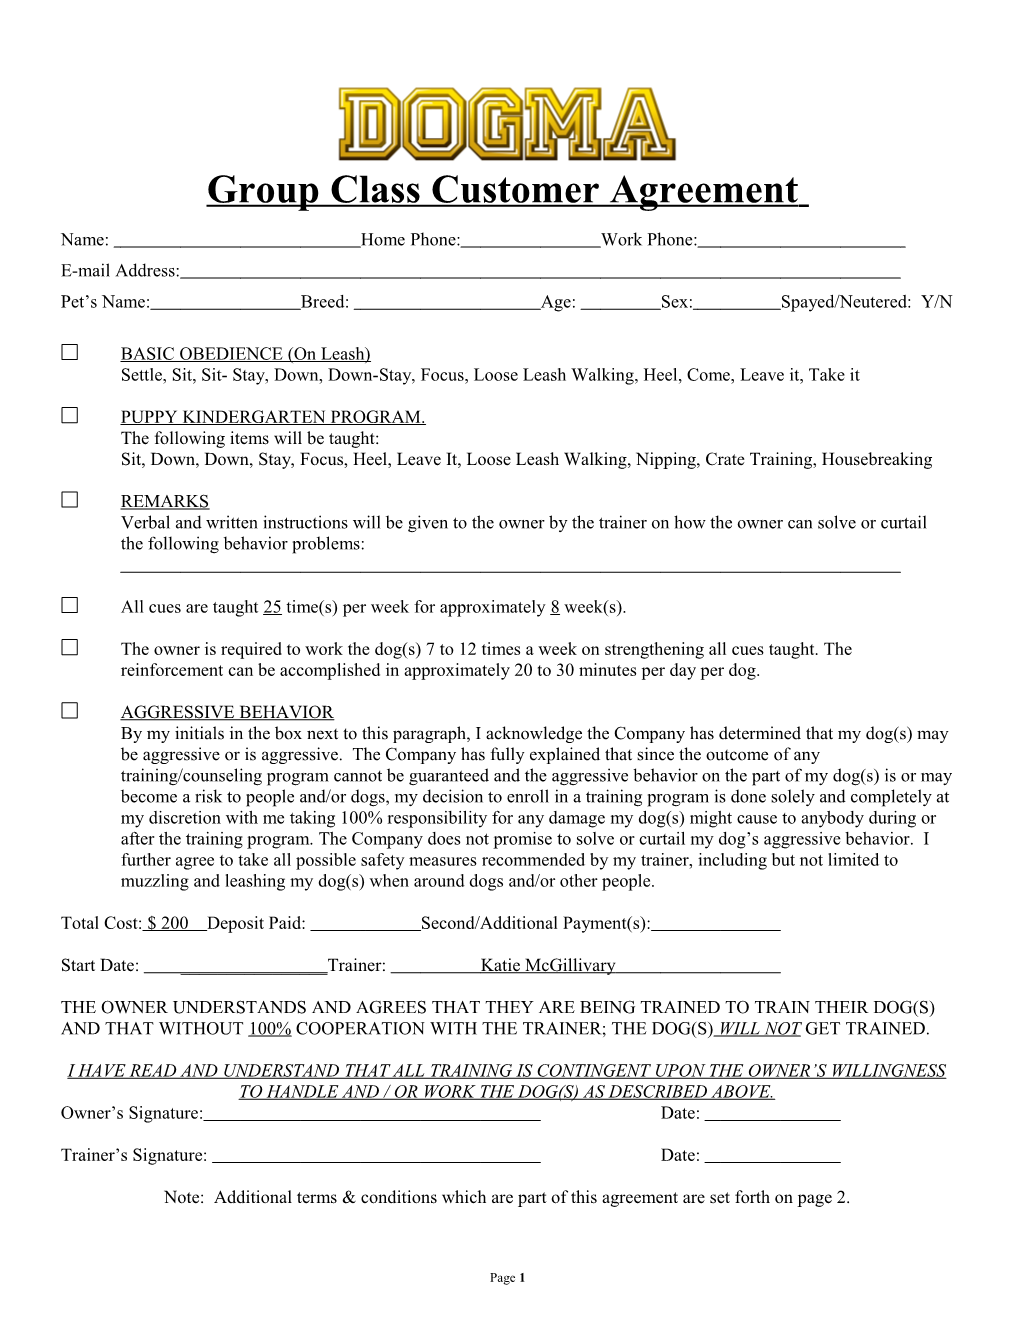 Customer Agreement - Group Classes